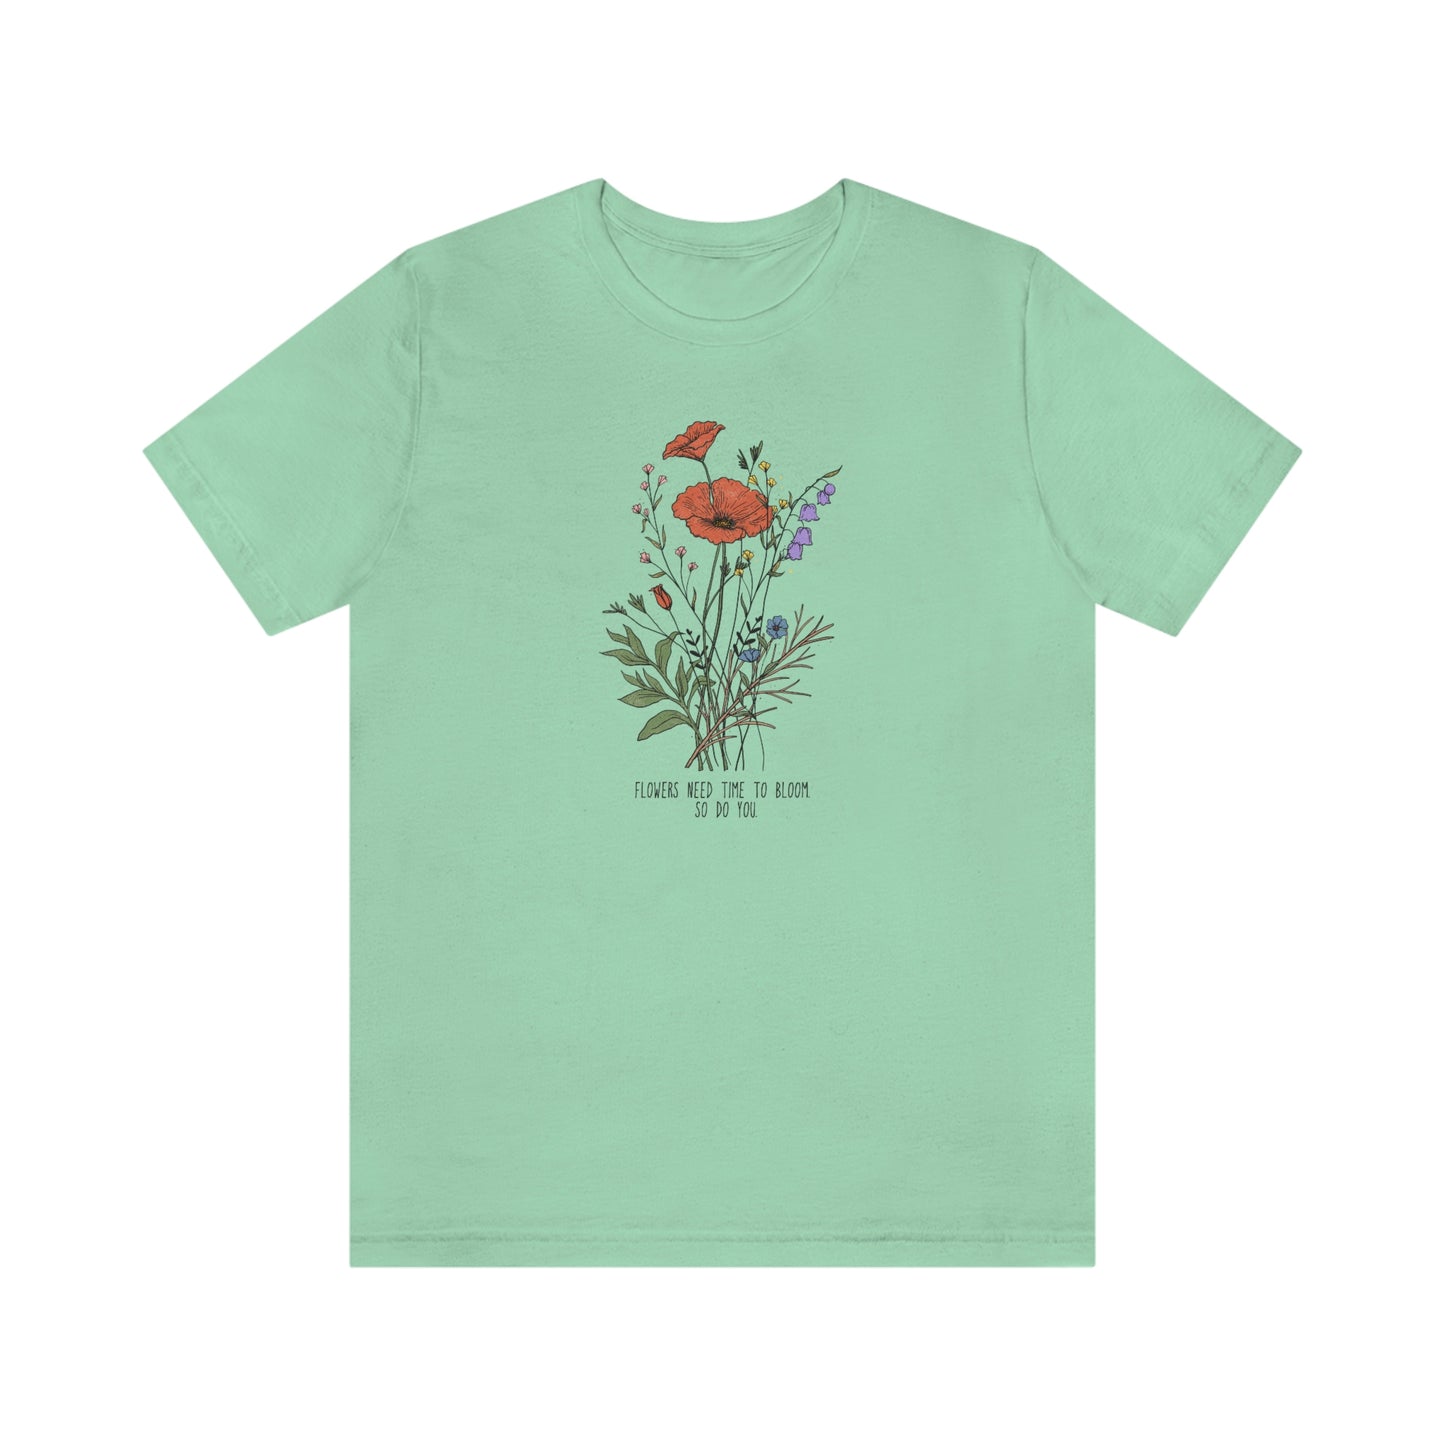 Flowers Need Time To Bloom So Do You T-Shirt